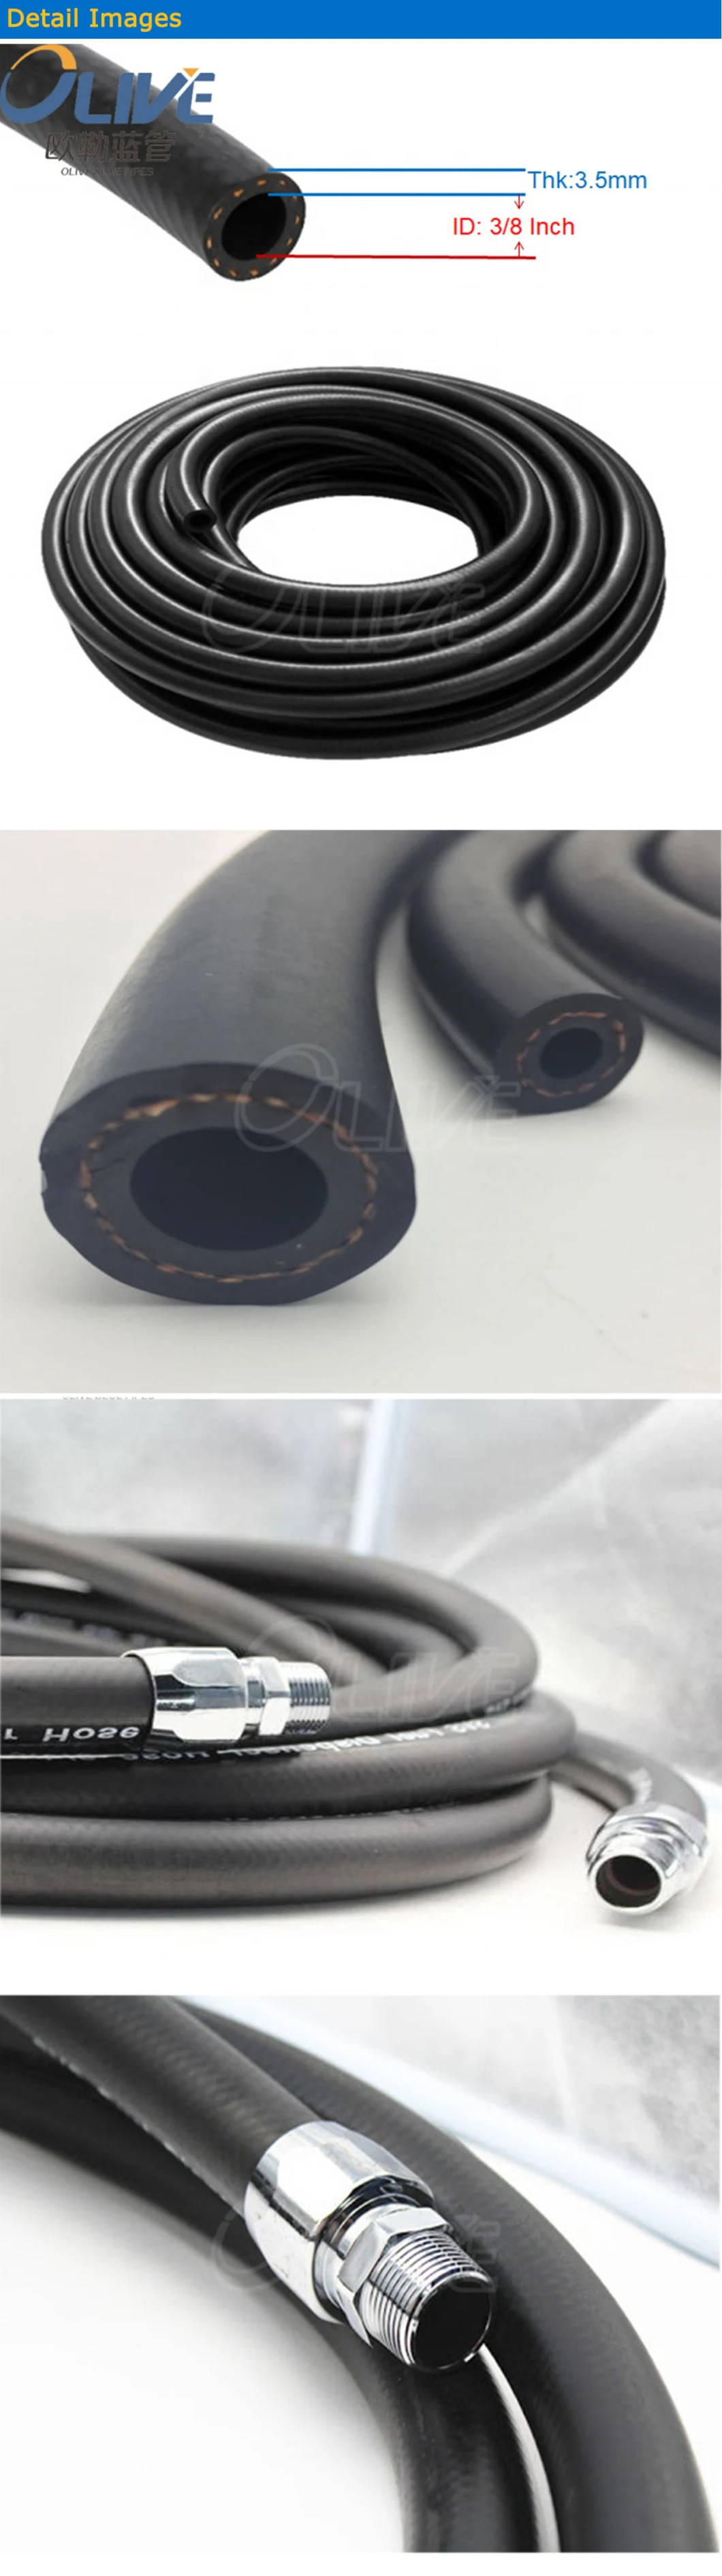 Small Diameter Flexible Braided Soft Nitrile Fuel Hose SAE J30 Pipes Silicone Rubber Fuel Hose Pipe